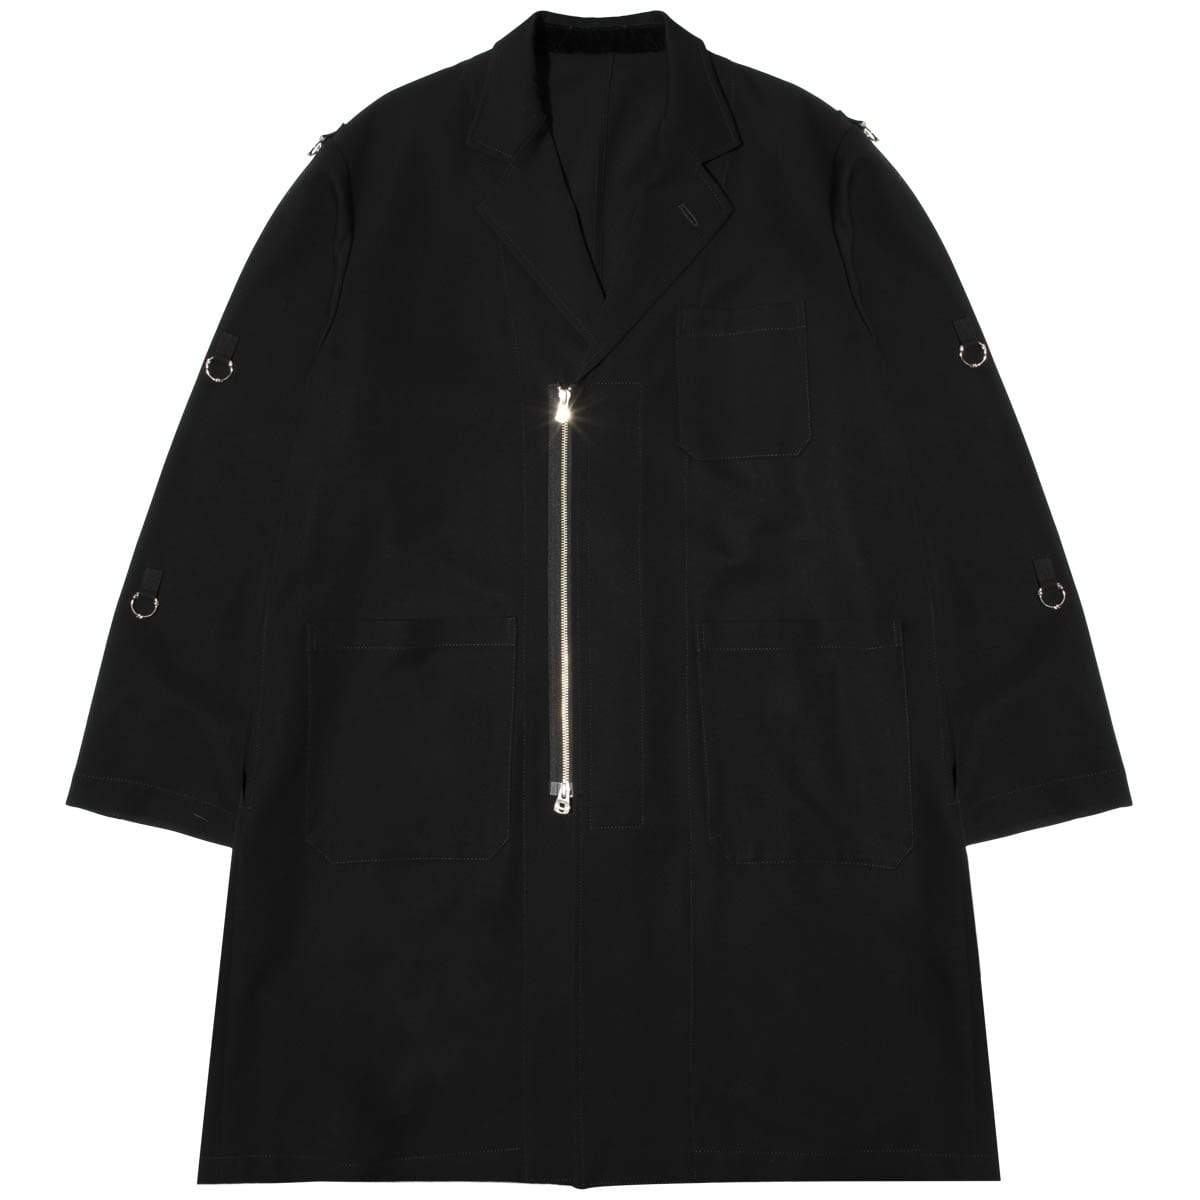 NOTCHED LAPEL DOCTOR JACKET